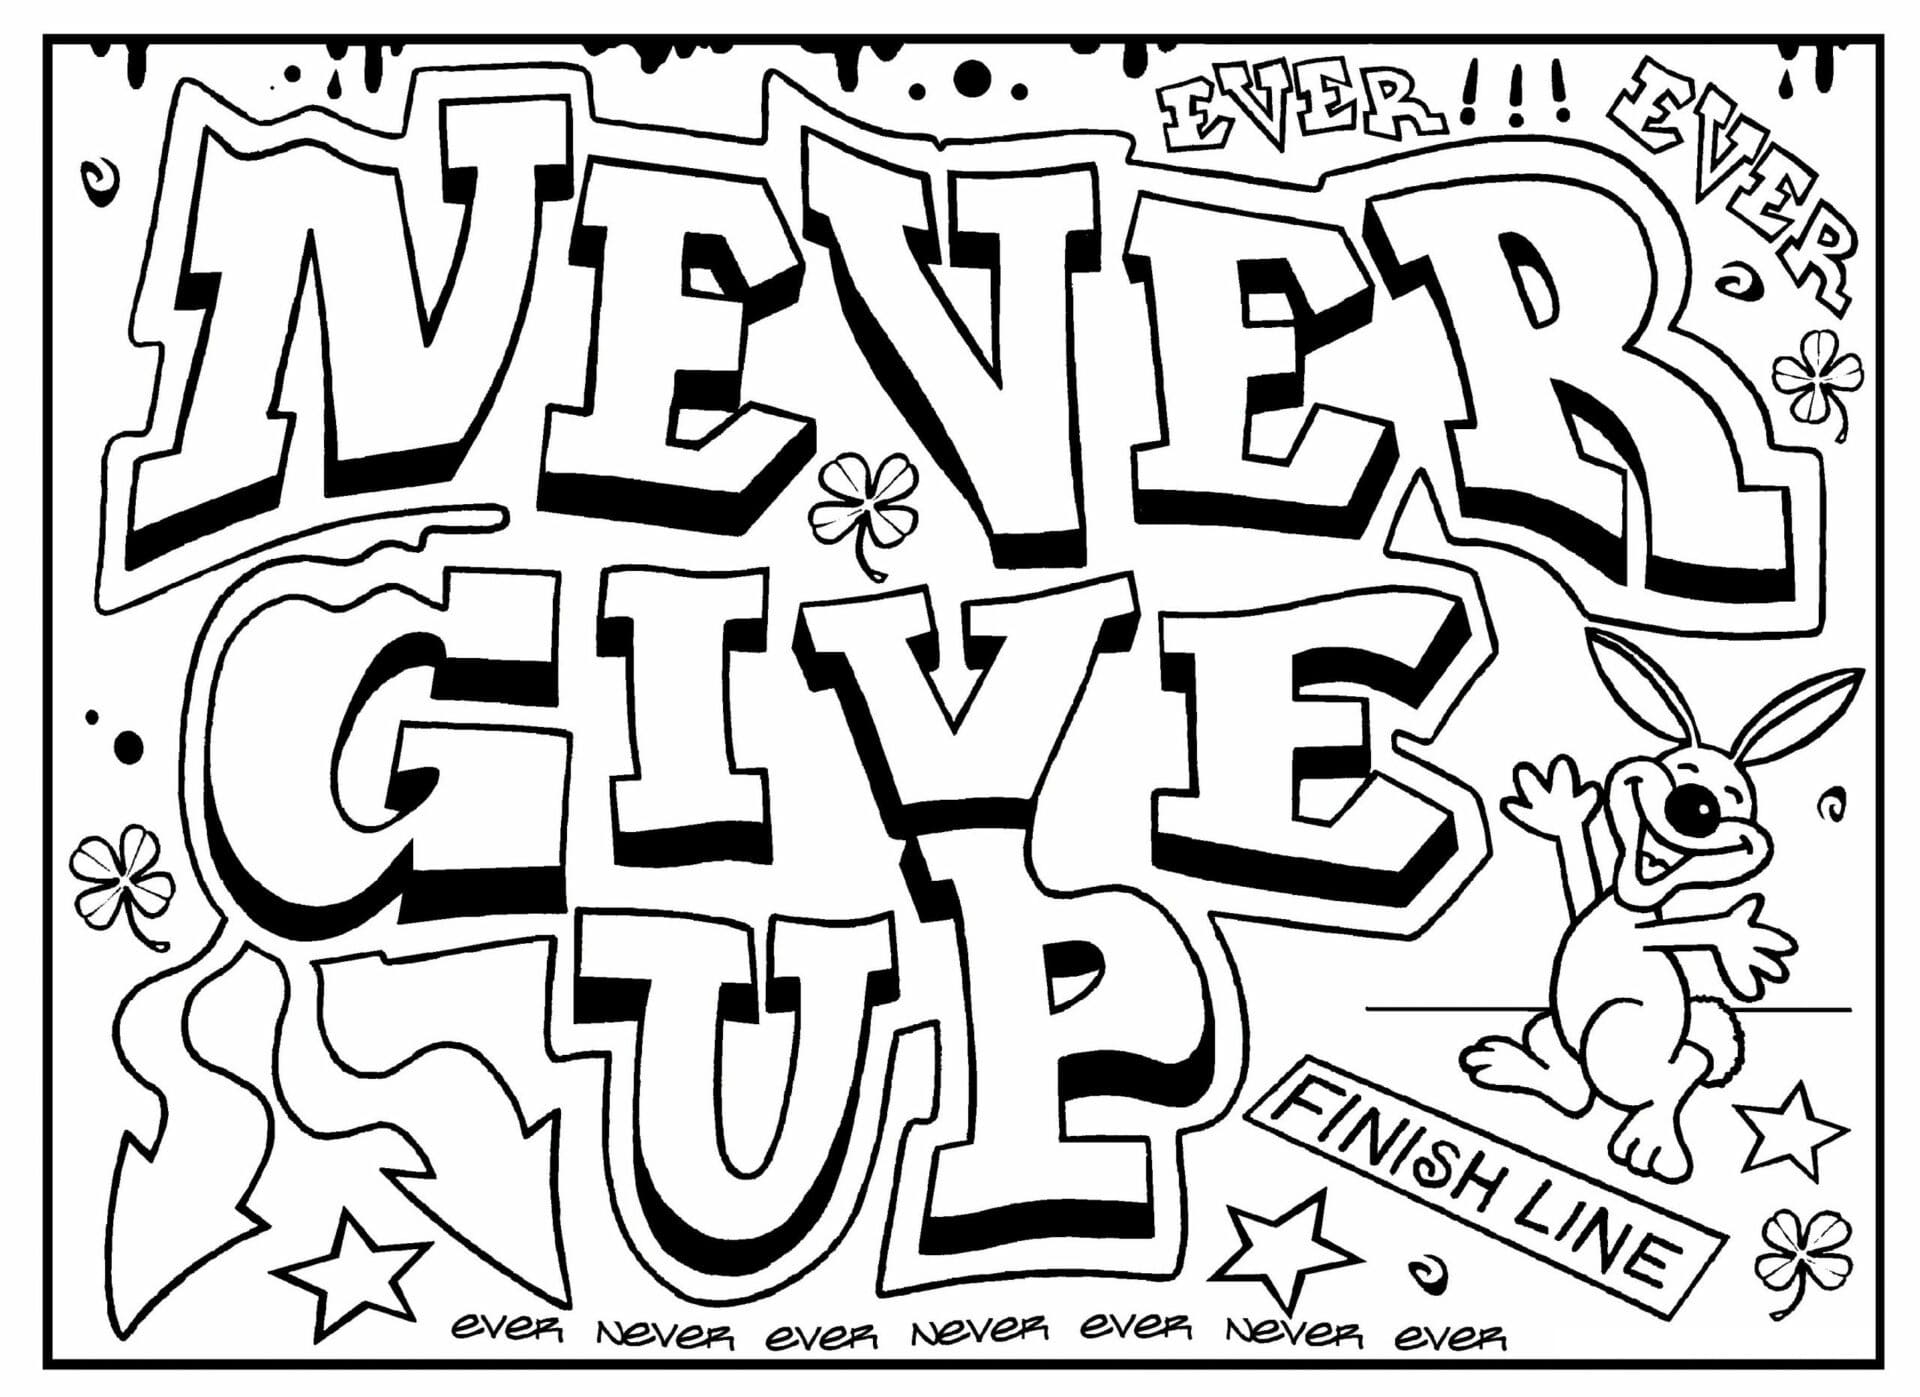 Never give up graffiti coloring page